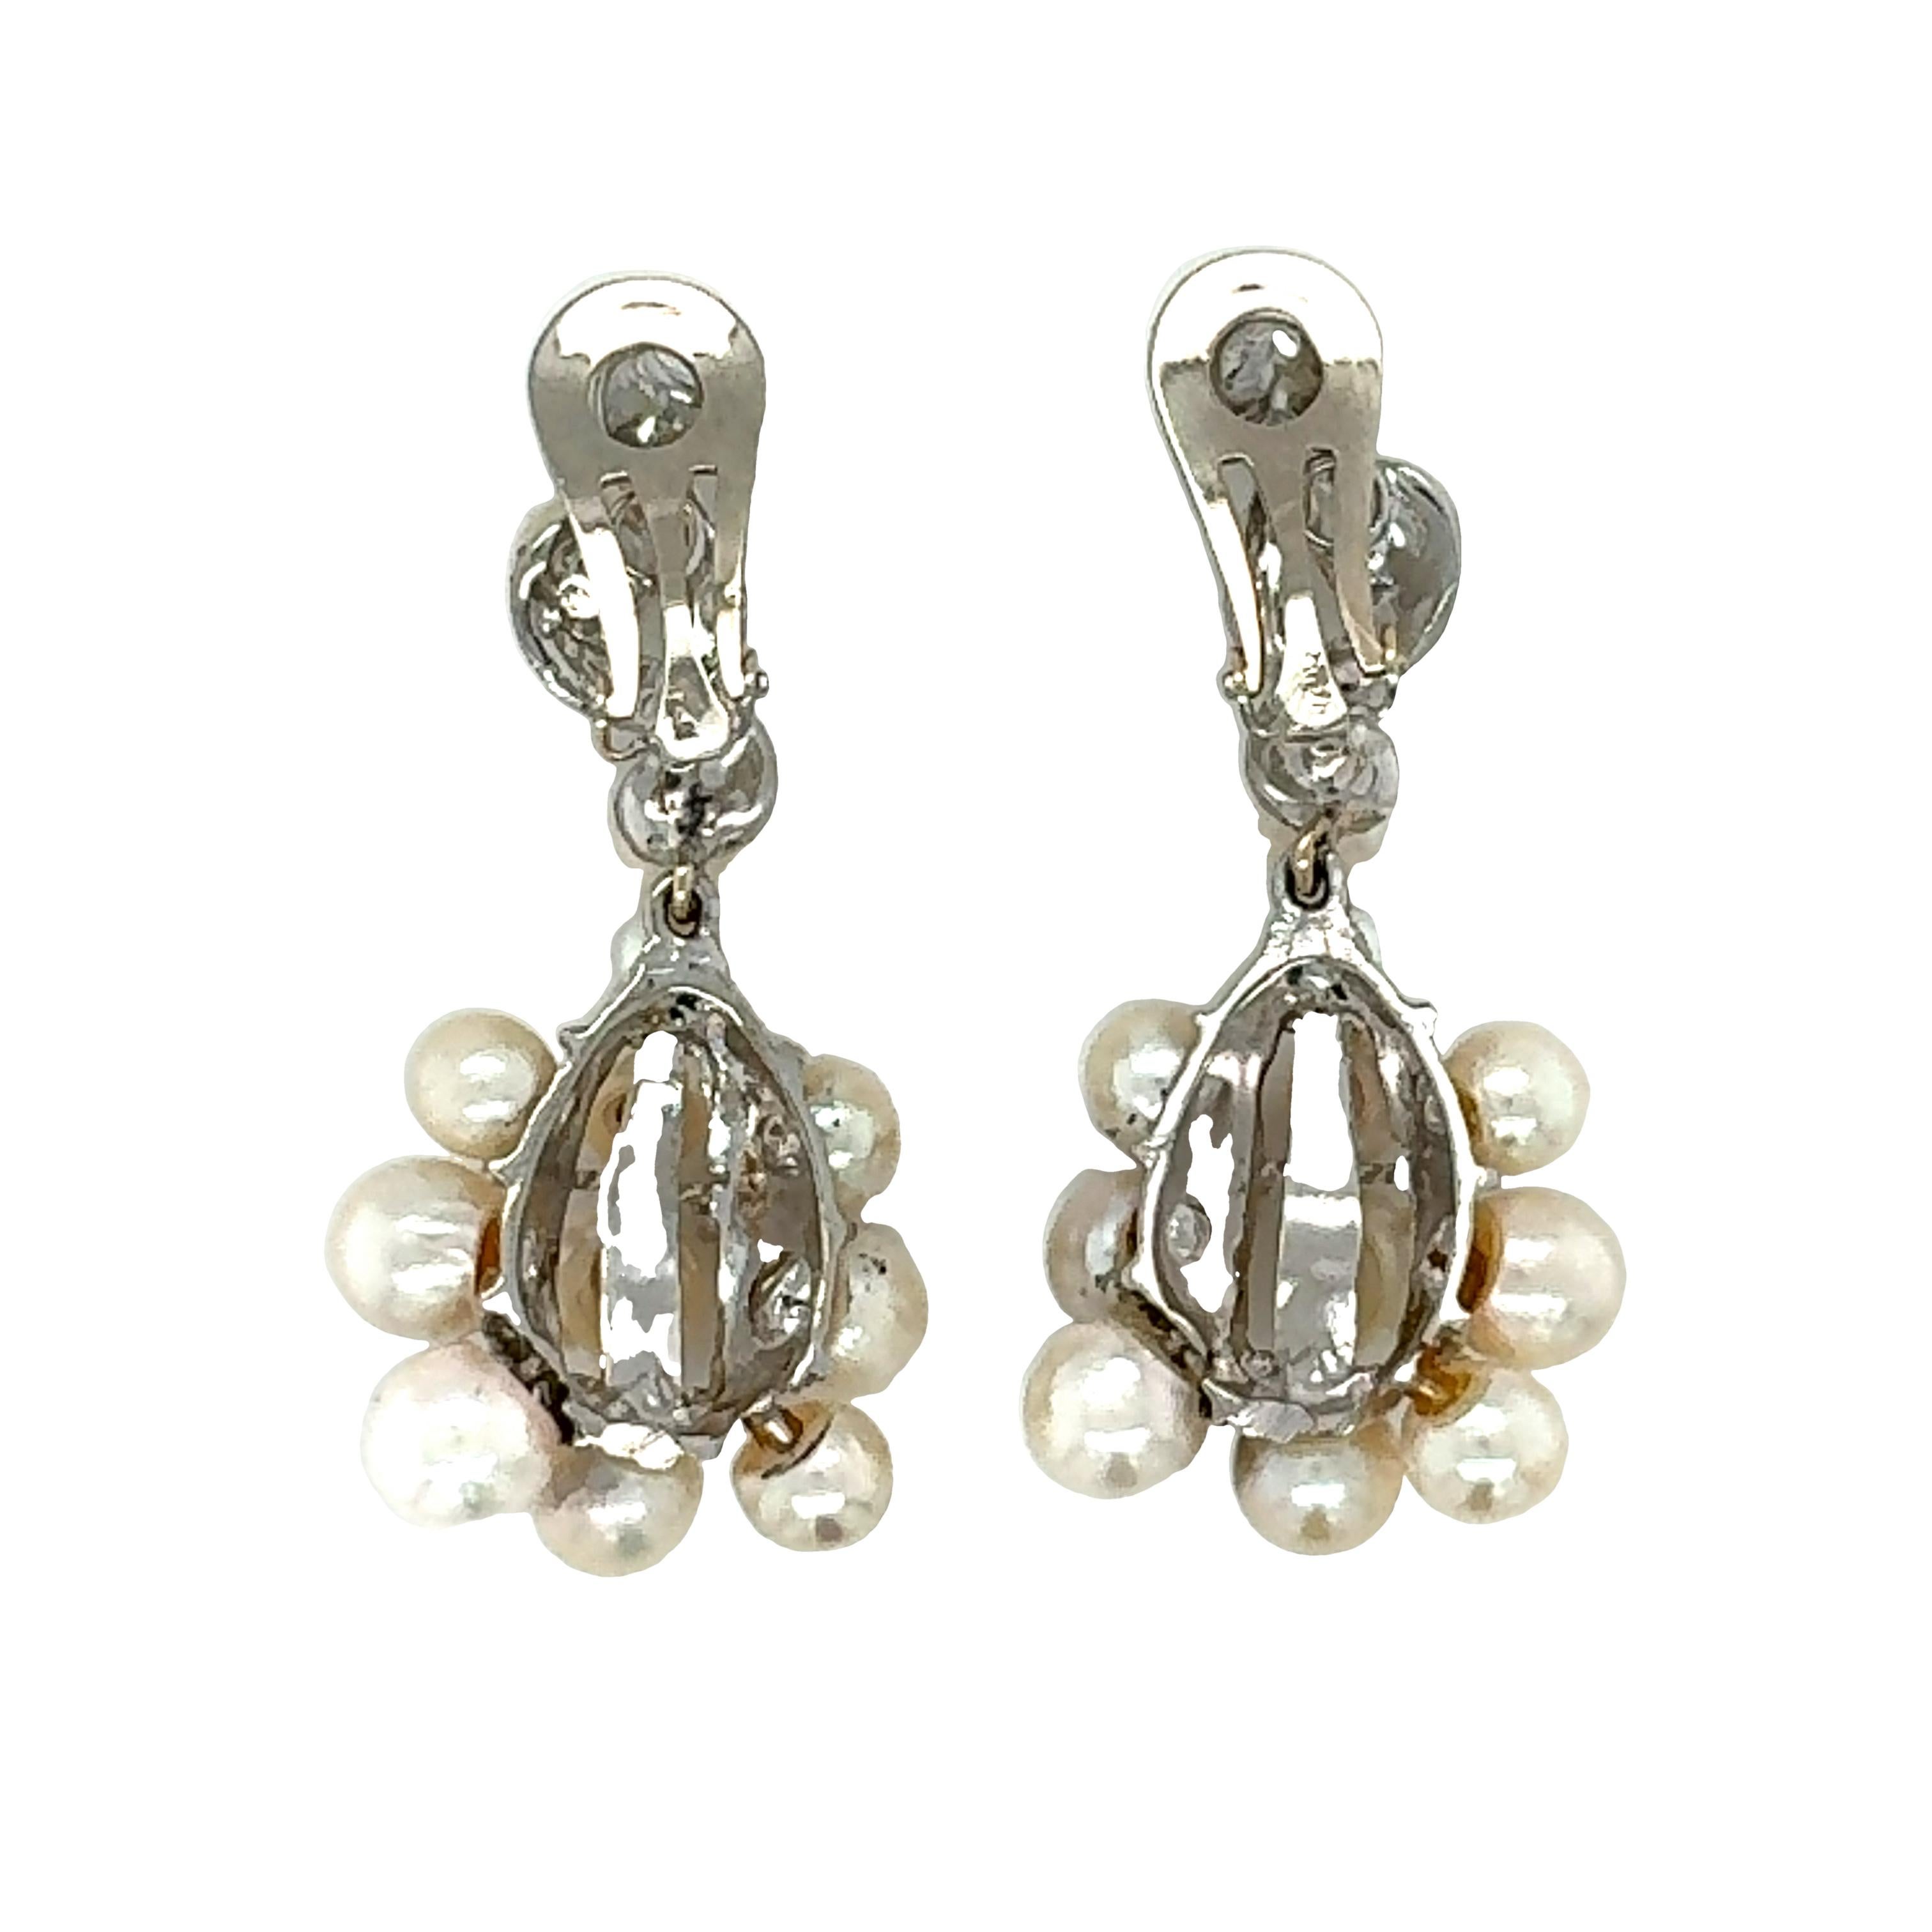 One pair of pearl and diamond dangling earrings in 14K white gold featuring 24 white, round cultured pearls measuring 4.00-6.50 millimeters in diameter. Accented by 8 prong set, single round cut diamonds totaling 0.12 ct. with L-M color and SI-2,